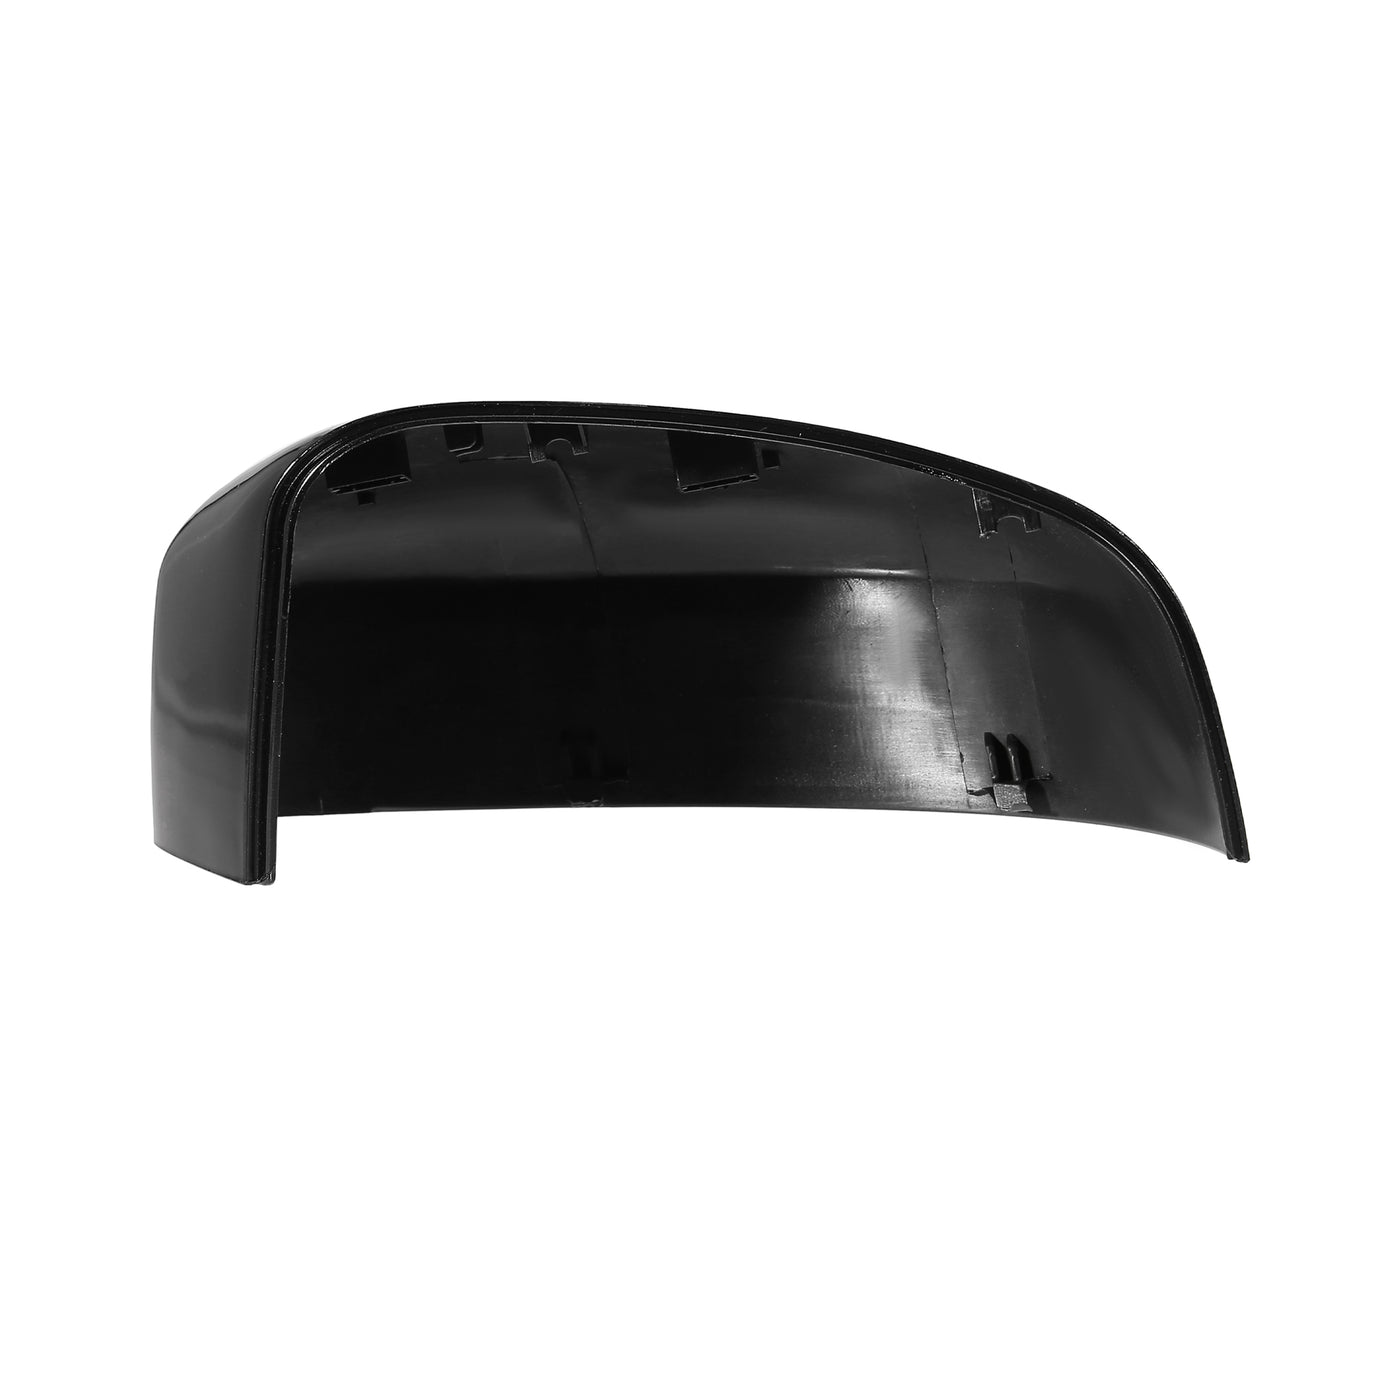 X AUTOHAUX Black Right Side Car Side Door Wing Mirror Cover Rear View Mirror Cap for Ford Focus MK2 Facelift 2008-2011 for Ford Focus MK3 2012-2017